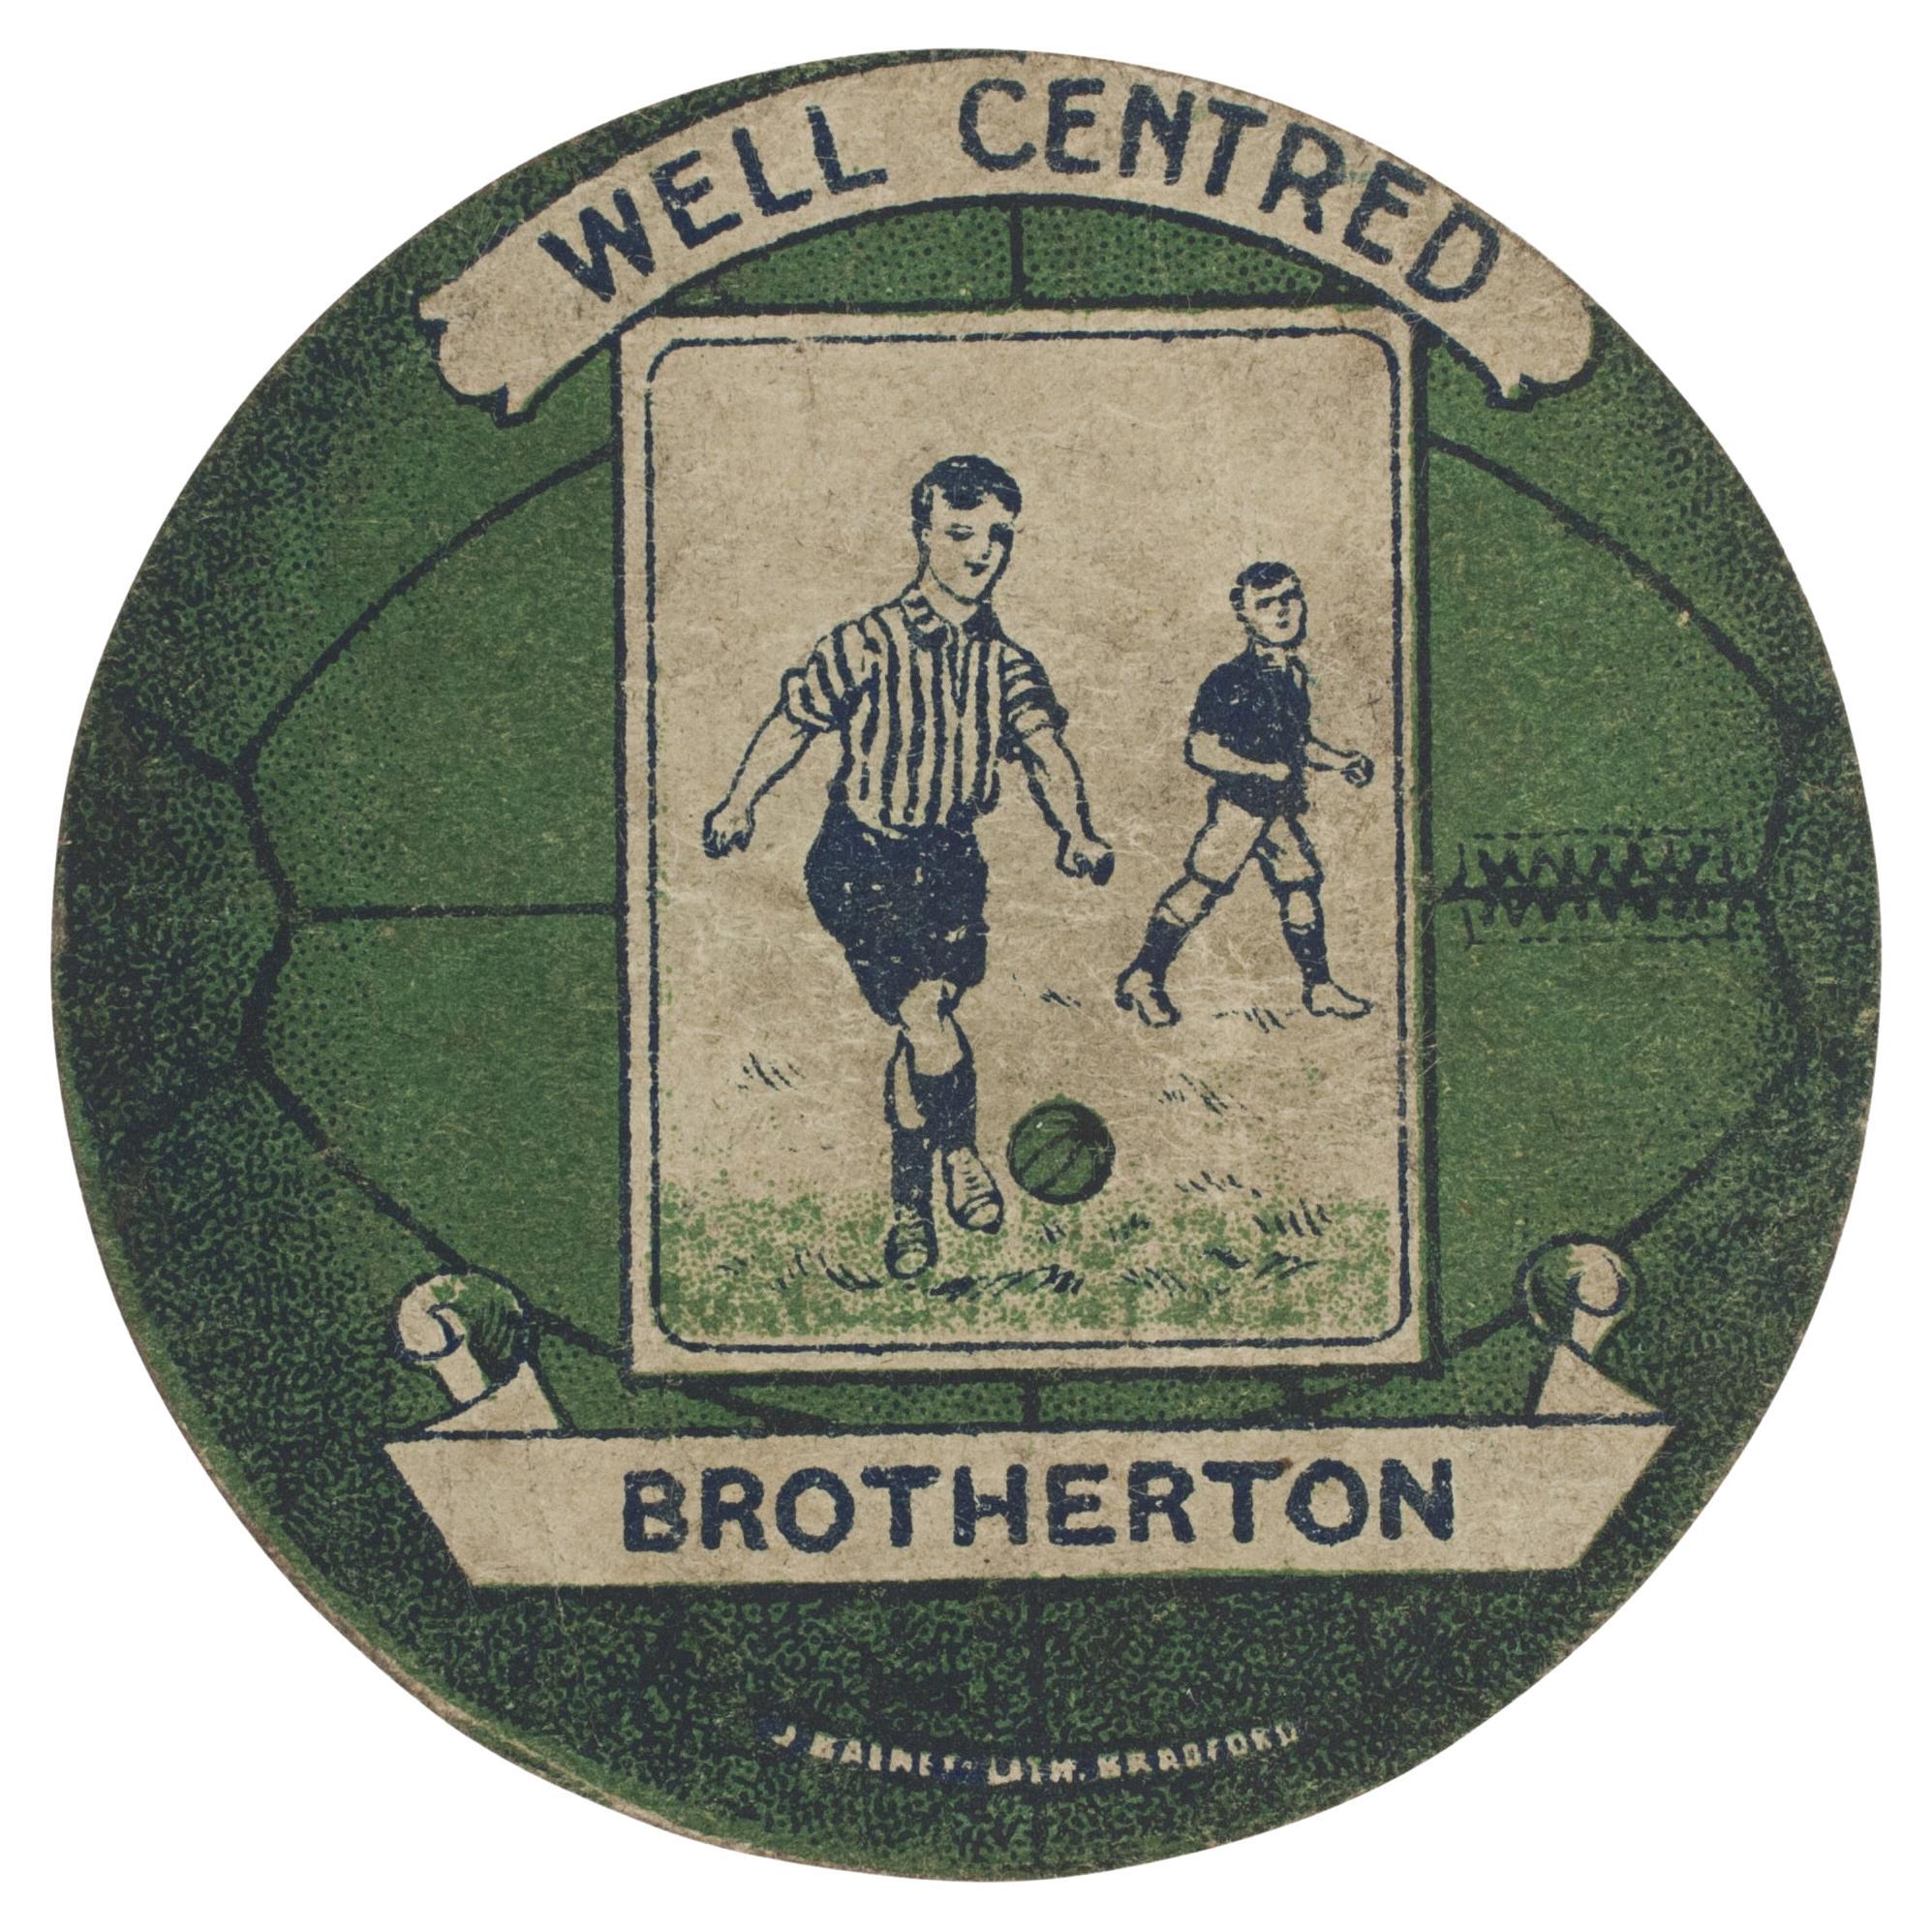 Vintage Baines Football Trade Card, Brotherton, Well Centred